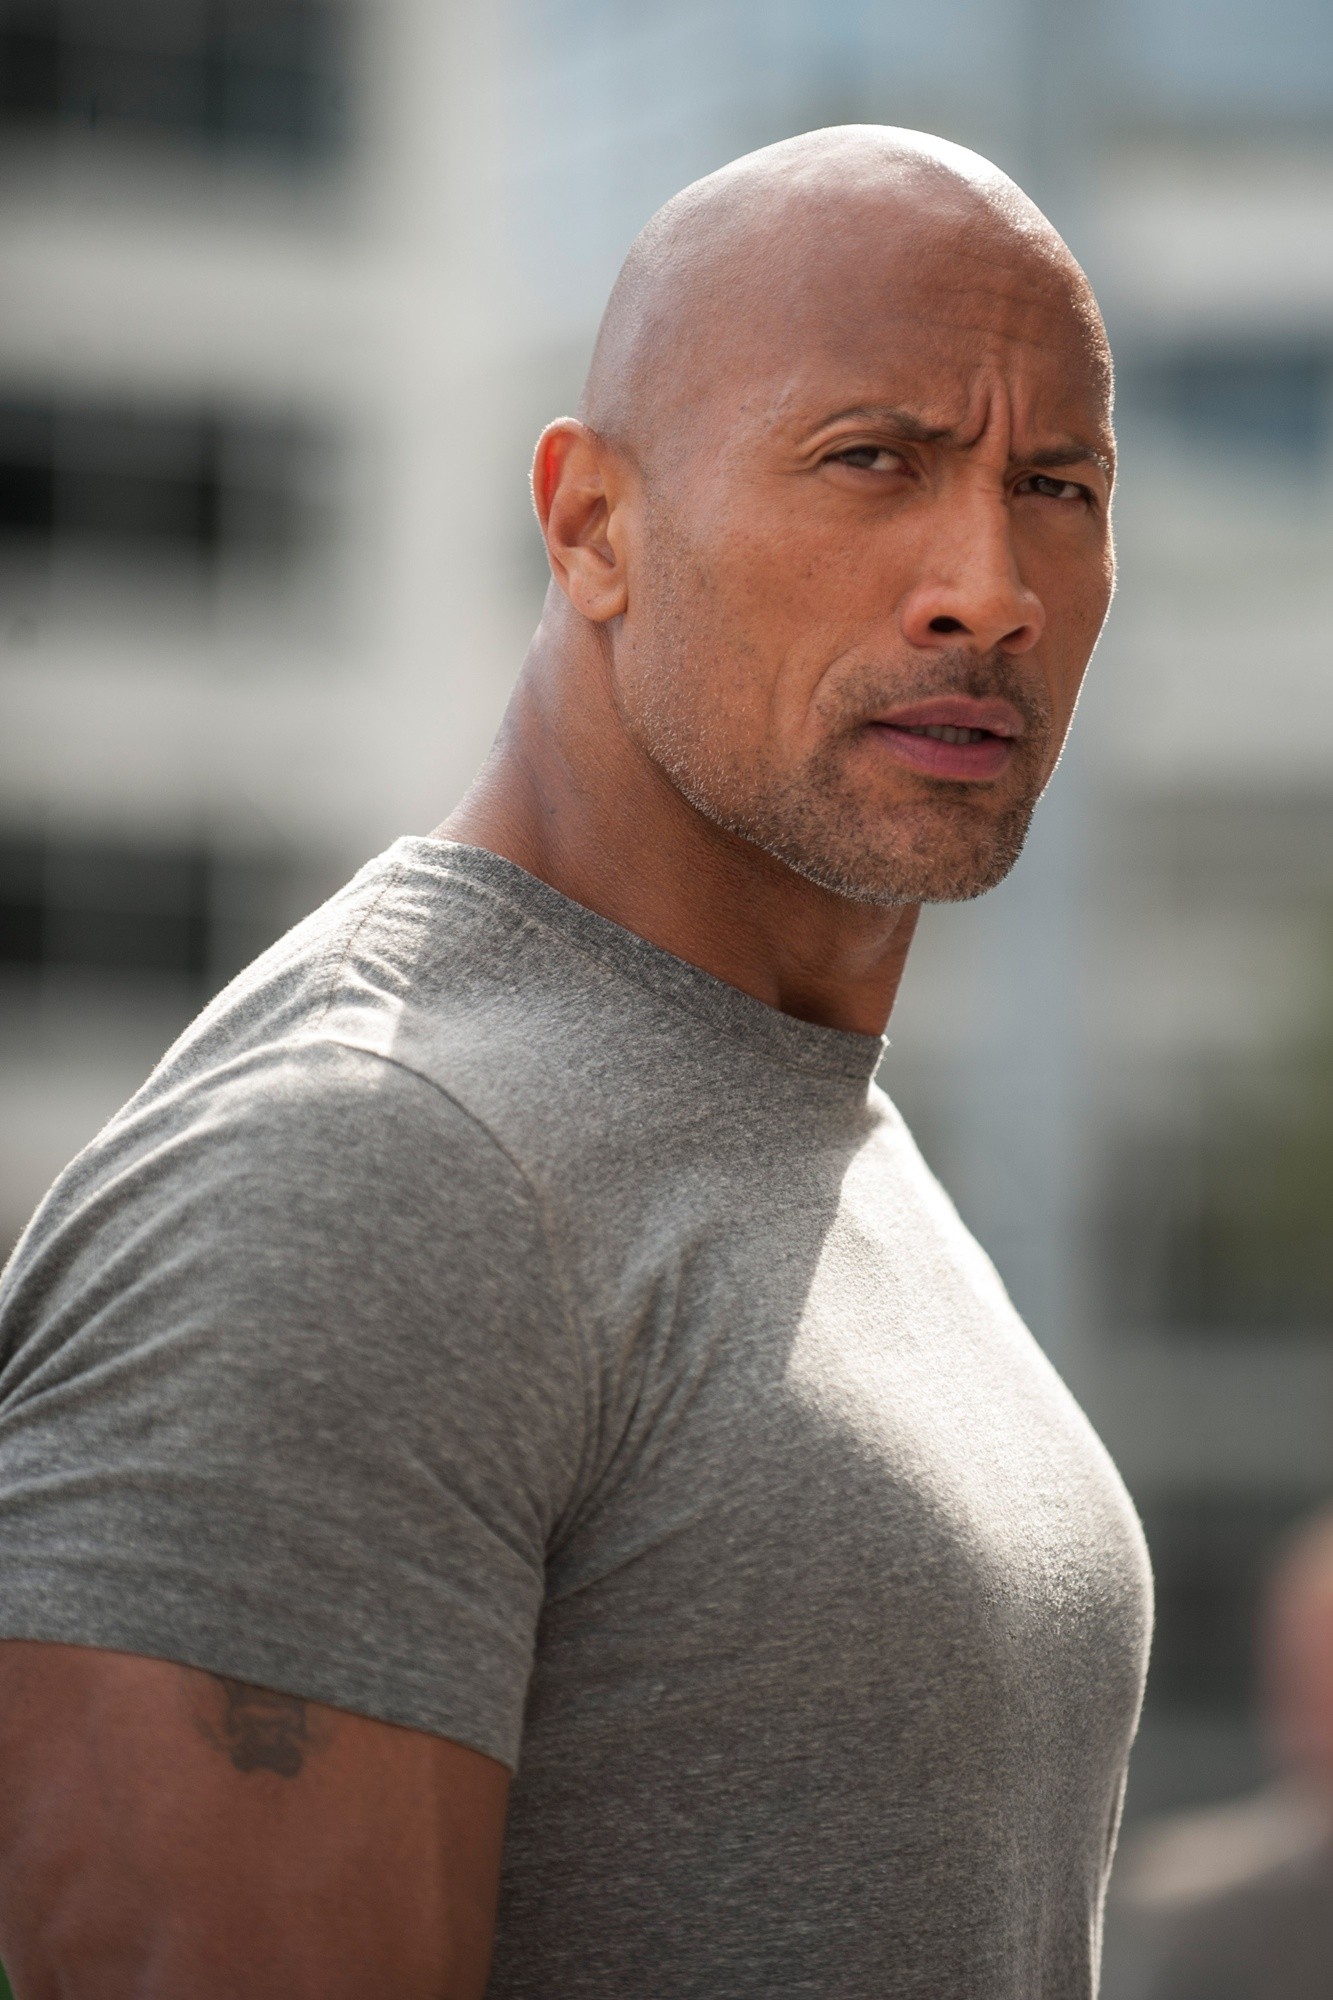 San Andreas (2015) Pictures, Photo, Image and Movie Stills